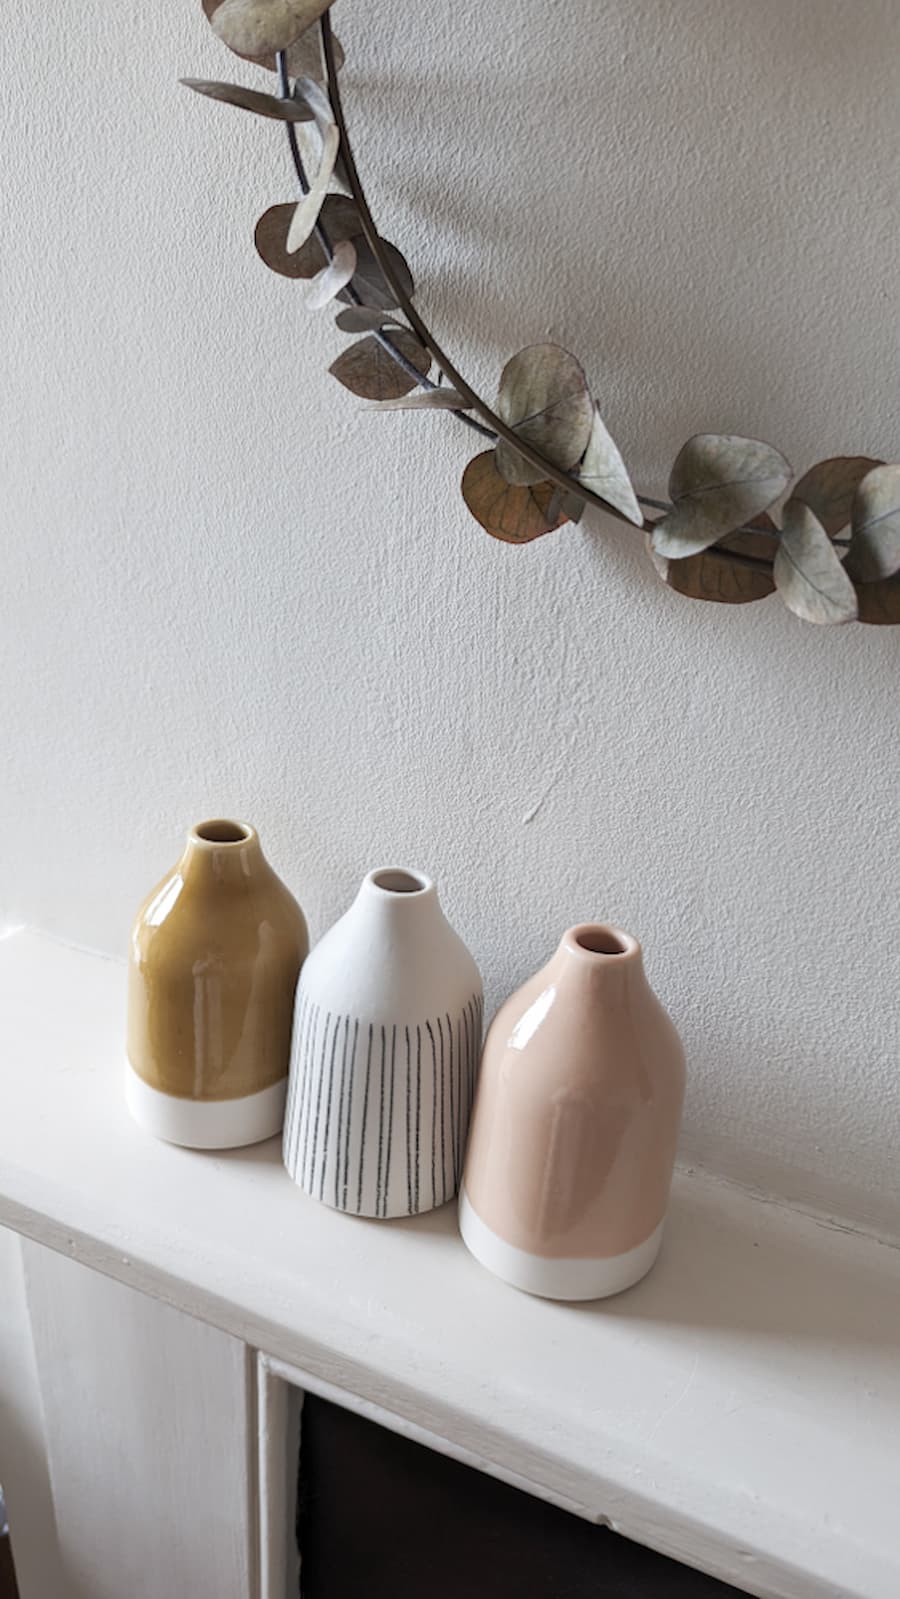 selection of bud vases in various finishes